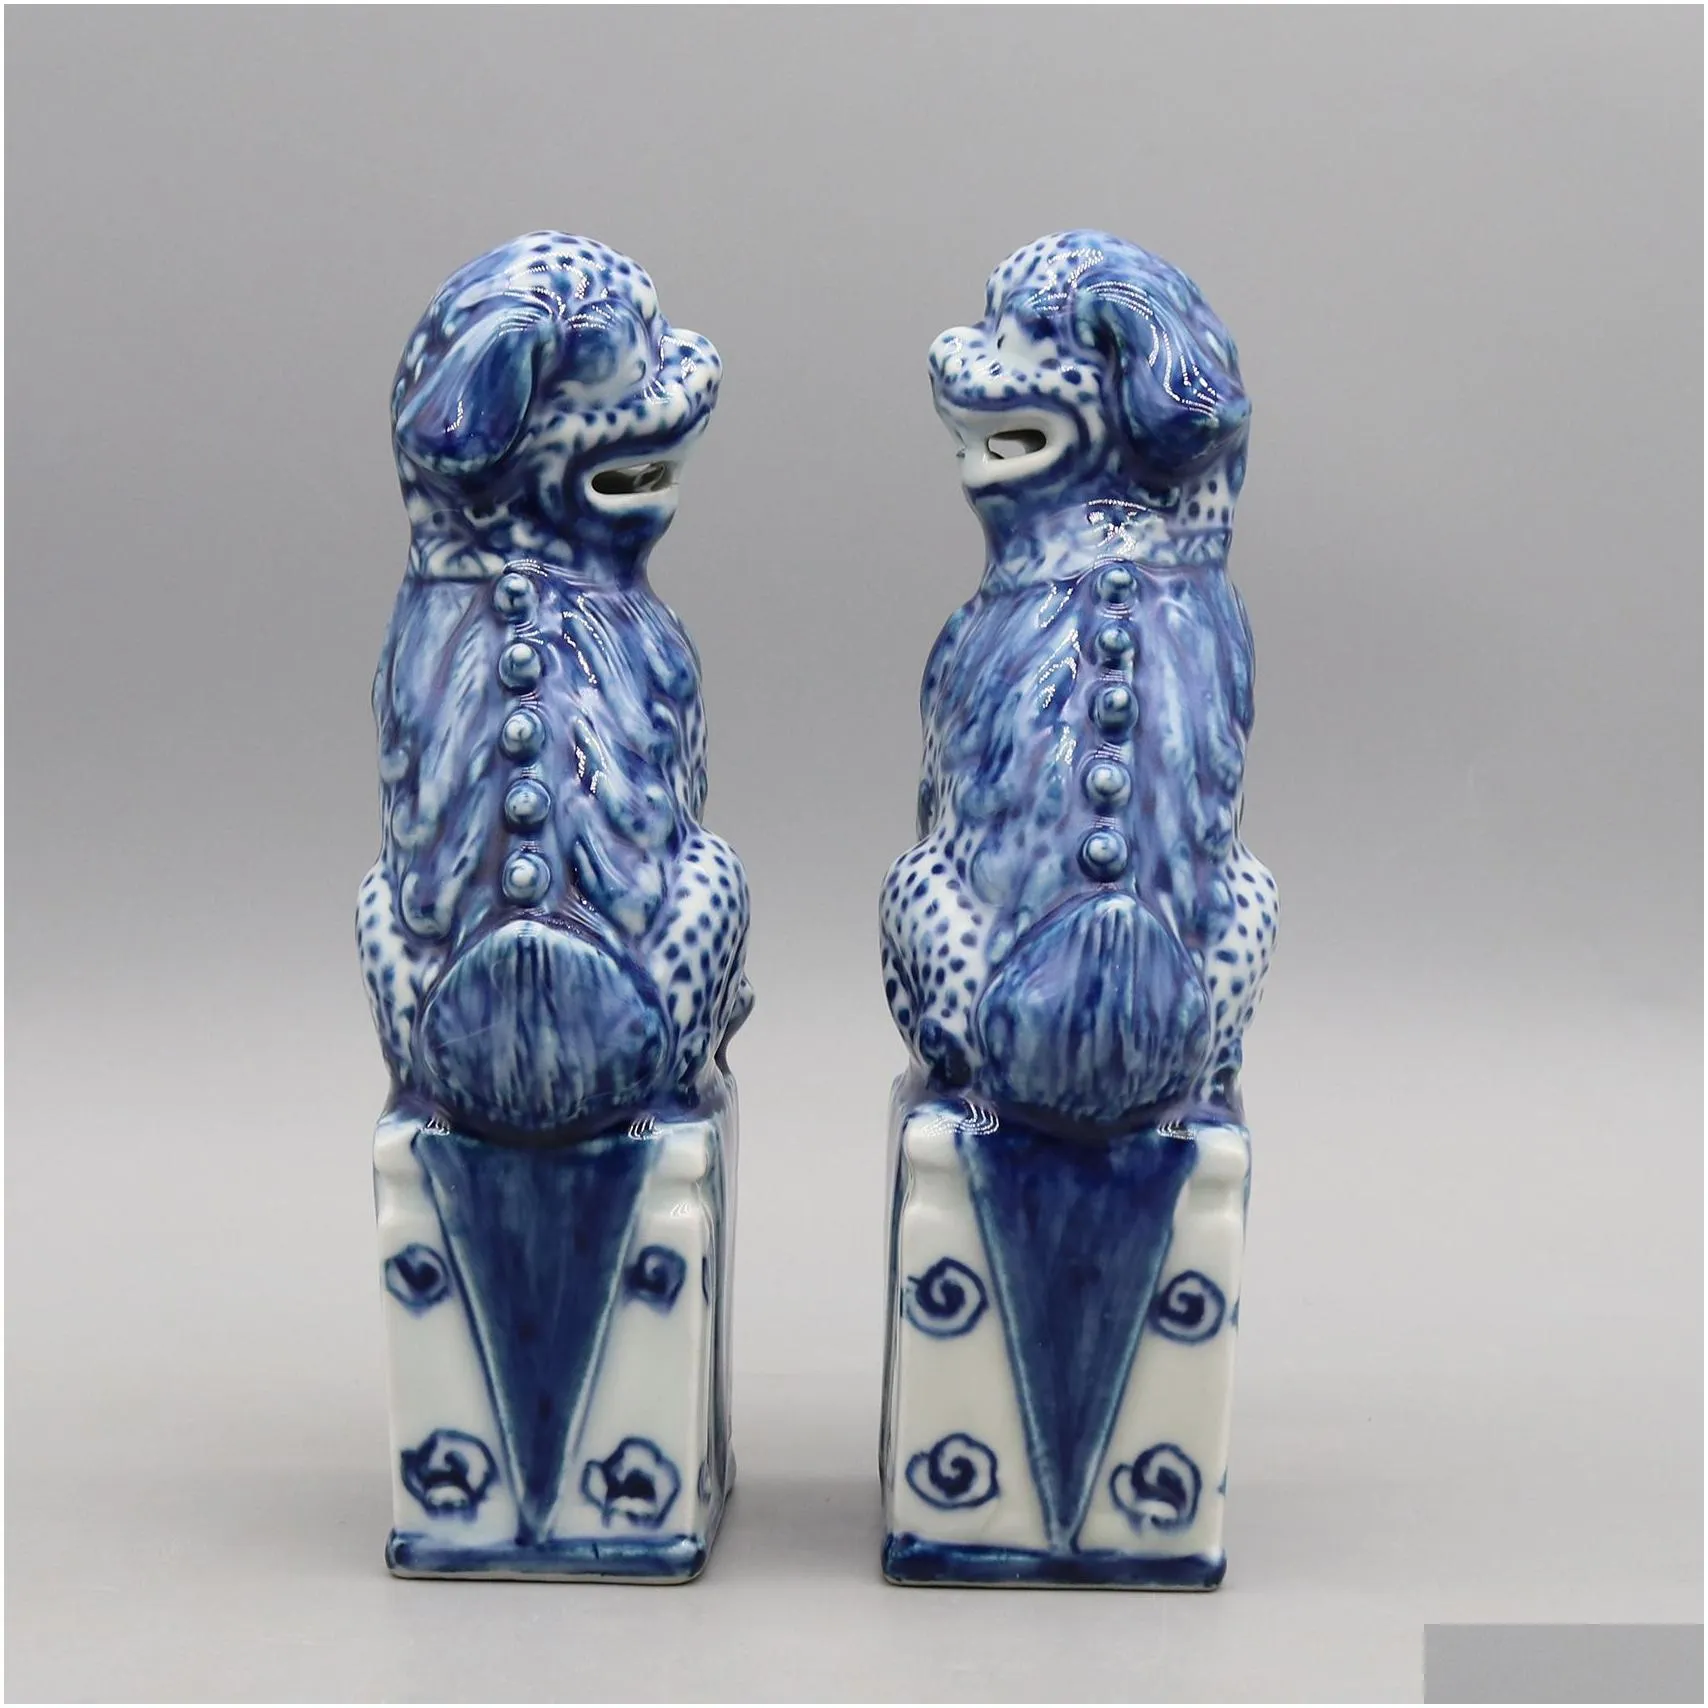 Blue and White Ceramic Foo Dogs, Fu Dogs, Buddha Dogs, Collectible Guardian lions, Ceramic Sculpture, Home decoration